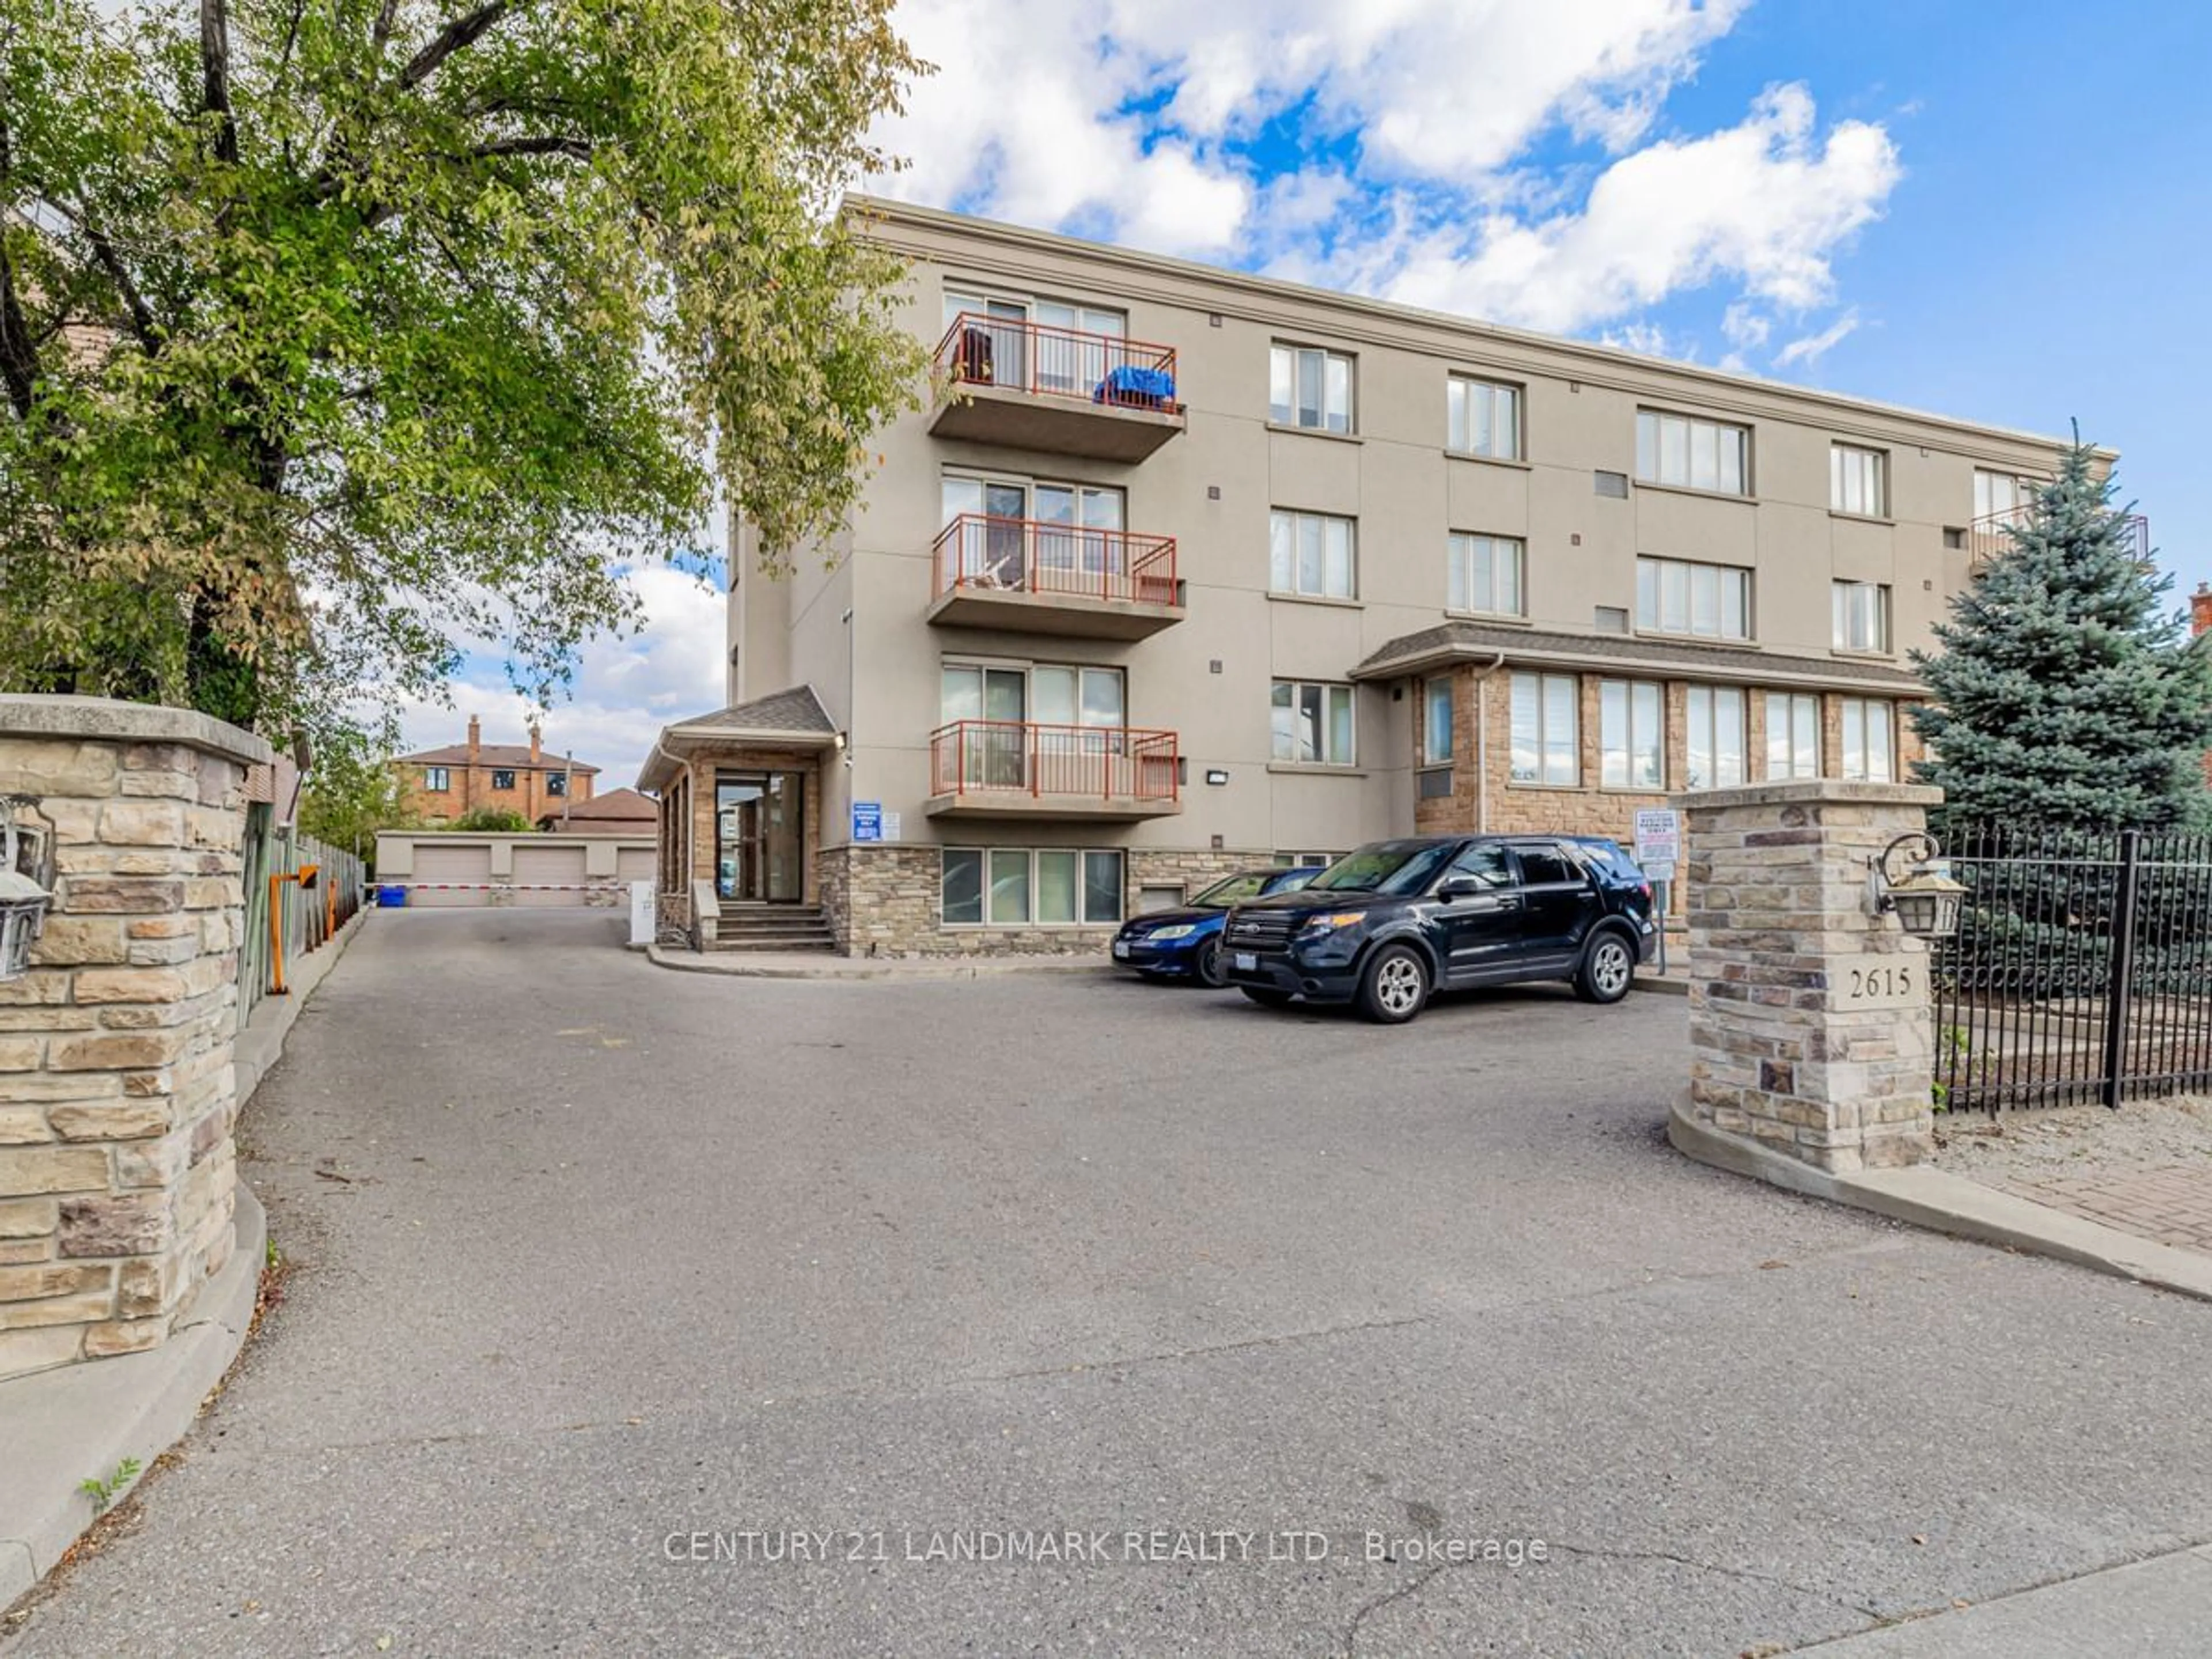 A pic from exterior of the house or condo for 2615 Keele St #405, Toronto Ontario M6L 2P2